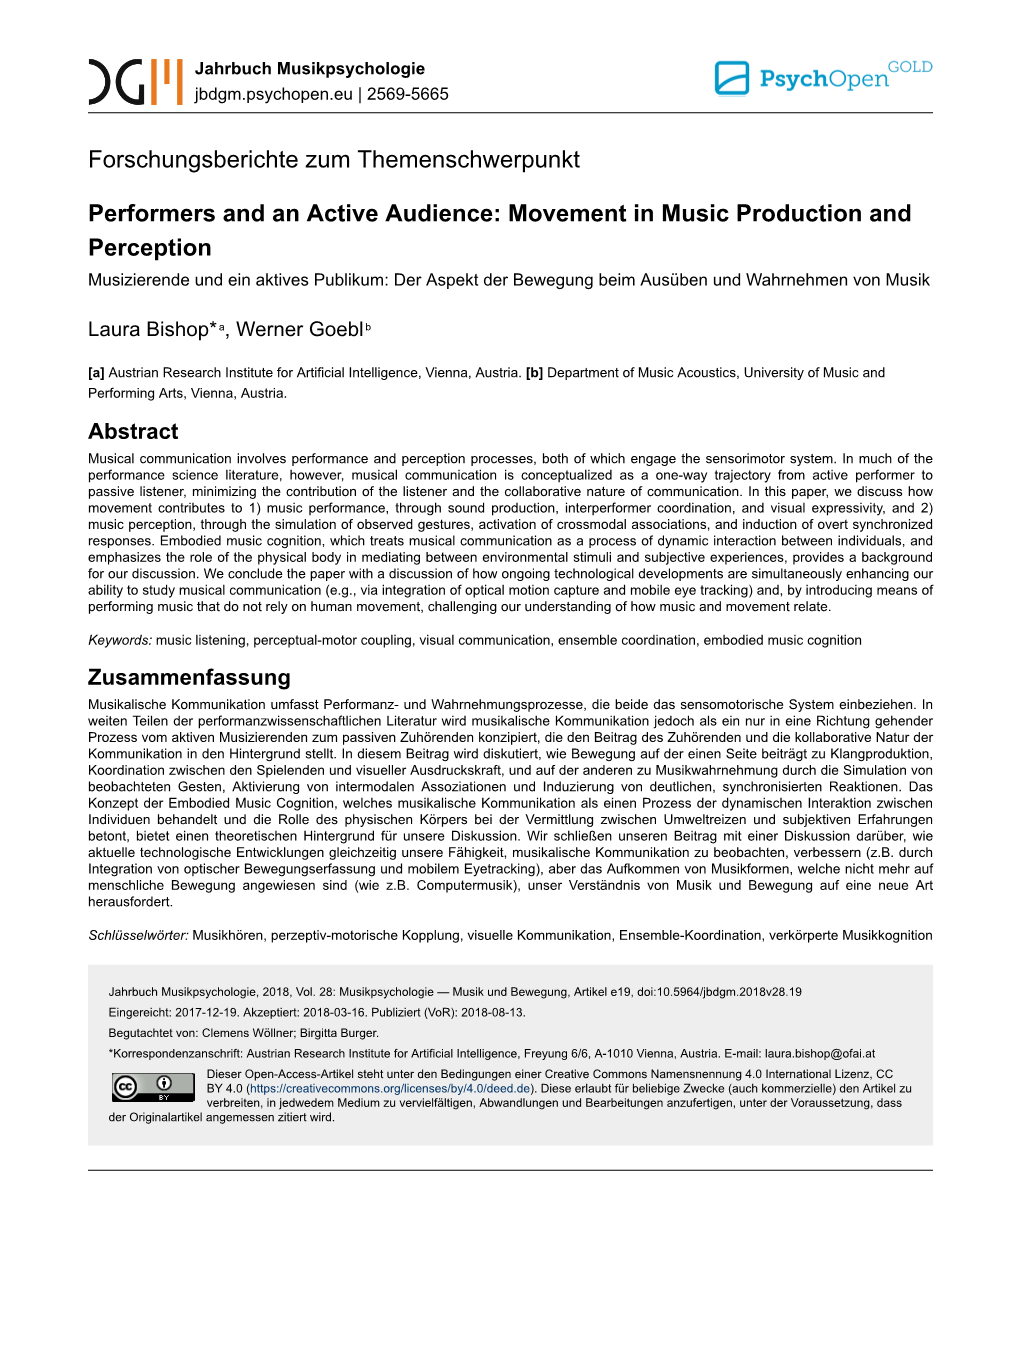 Performers and an Active Audience: Movement in Music Production And